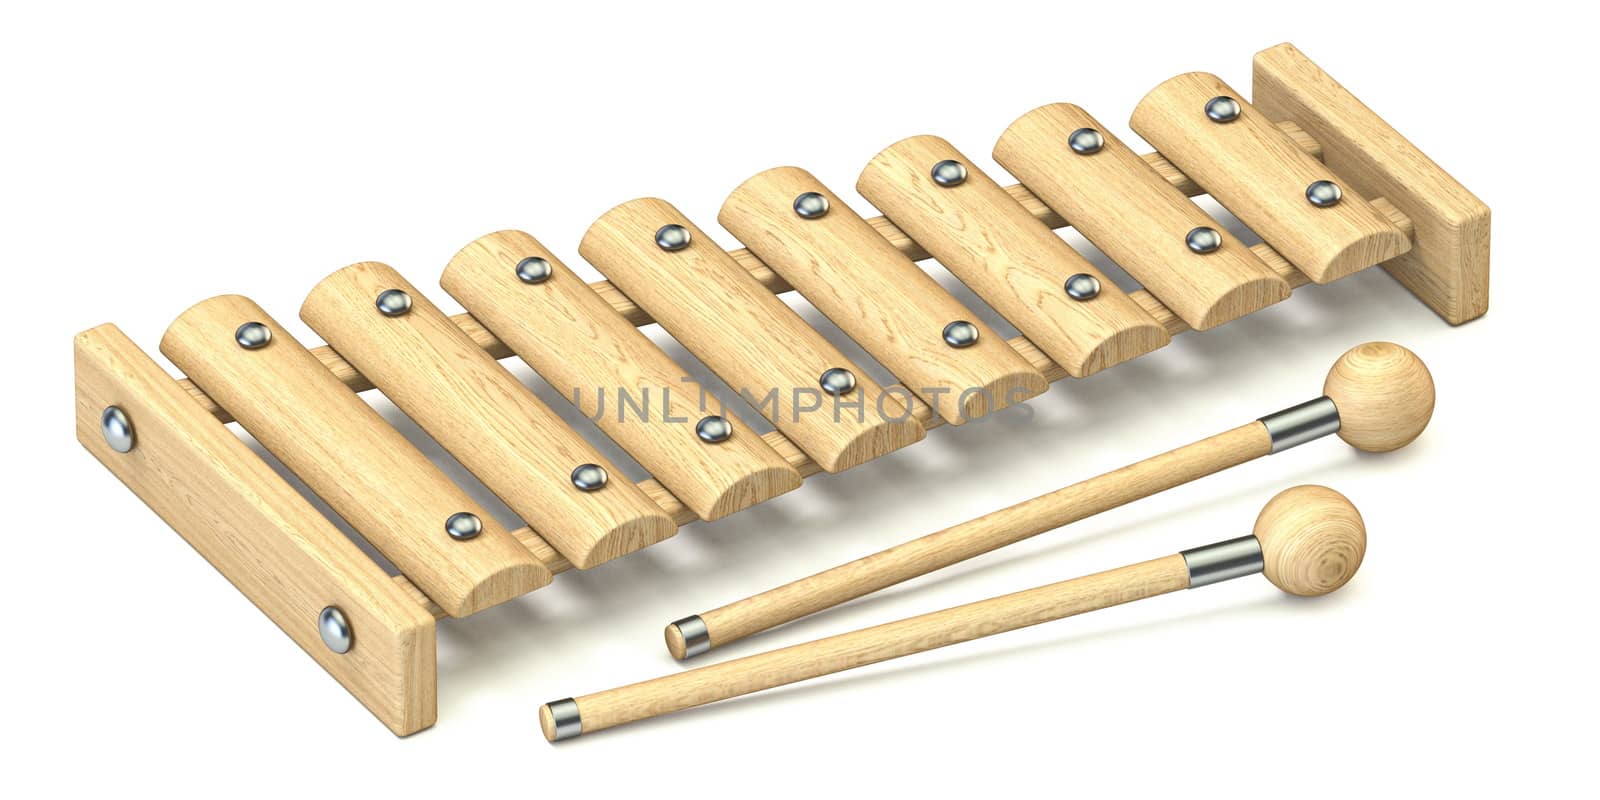 Wooden xylophone 3D render illustration isolated on white background